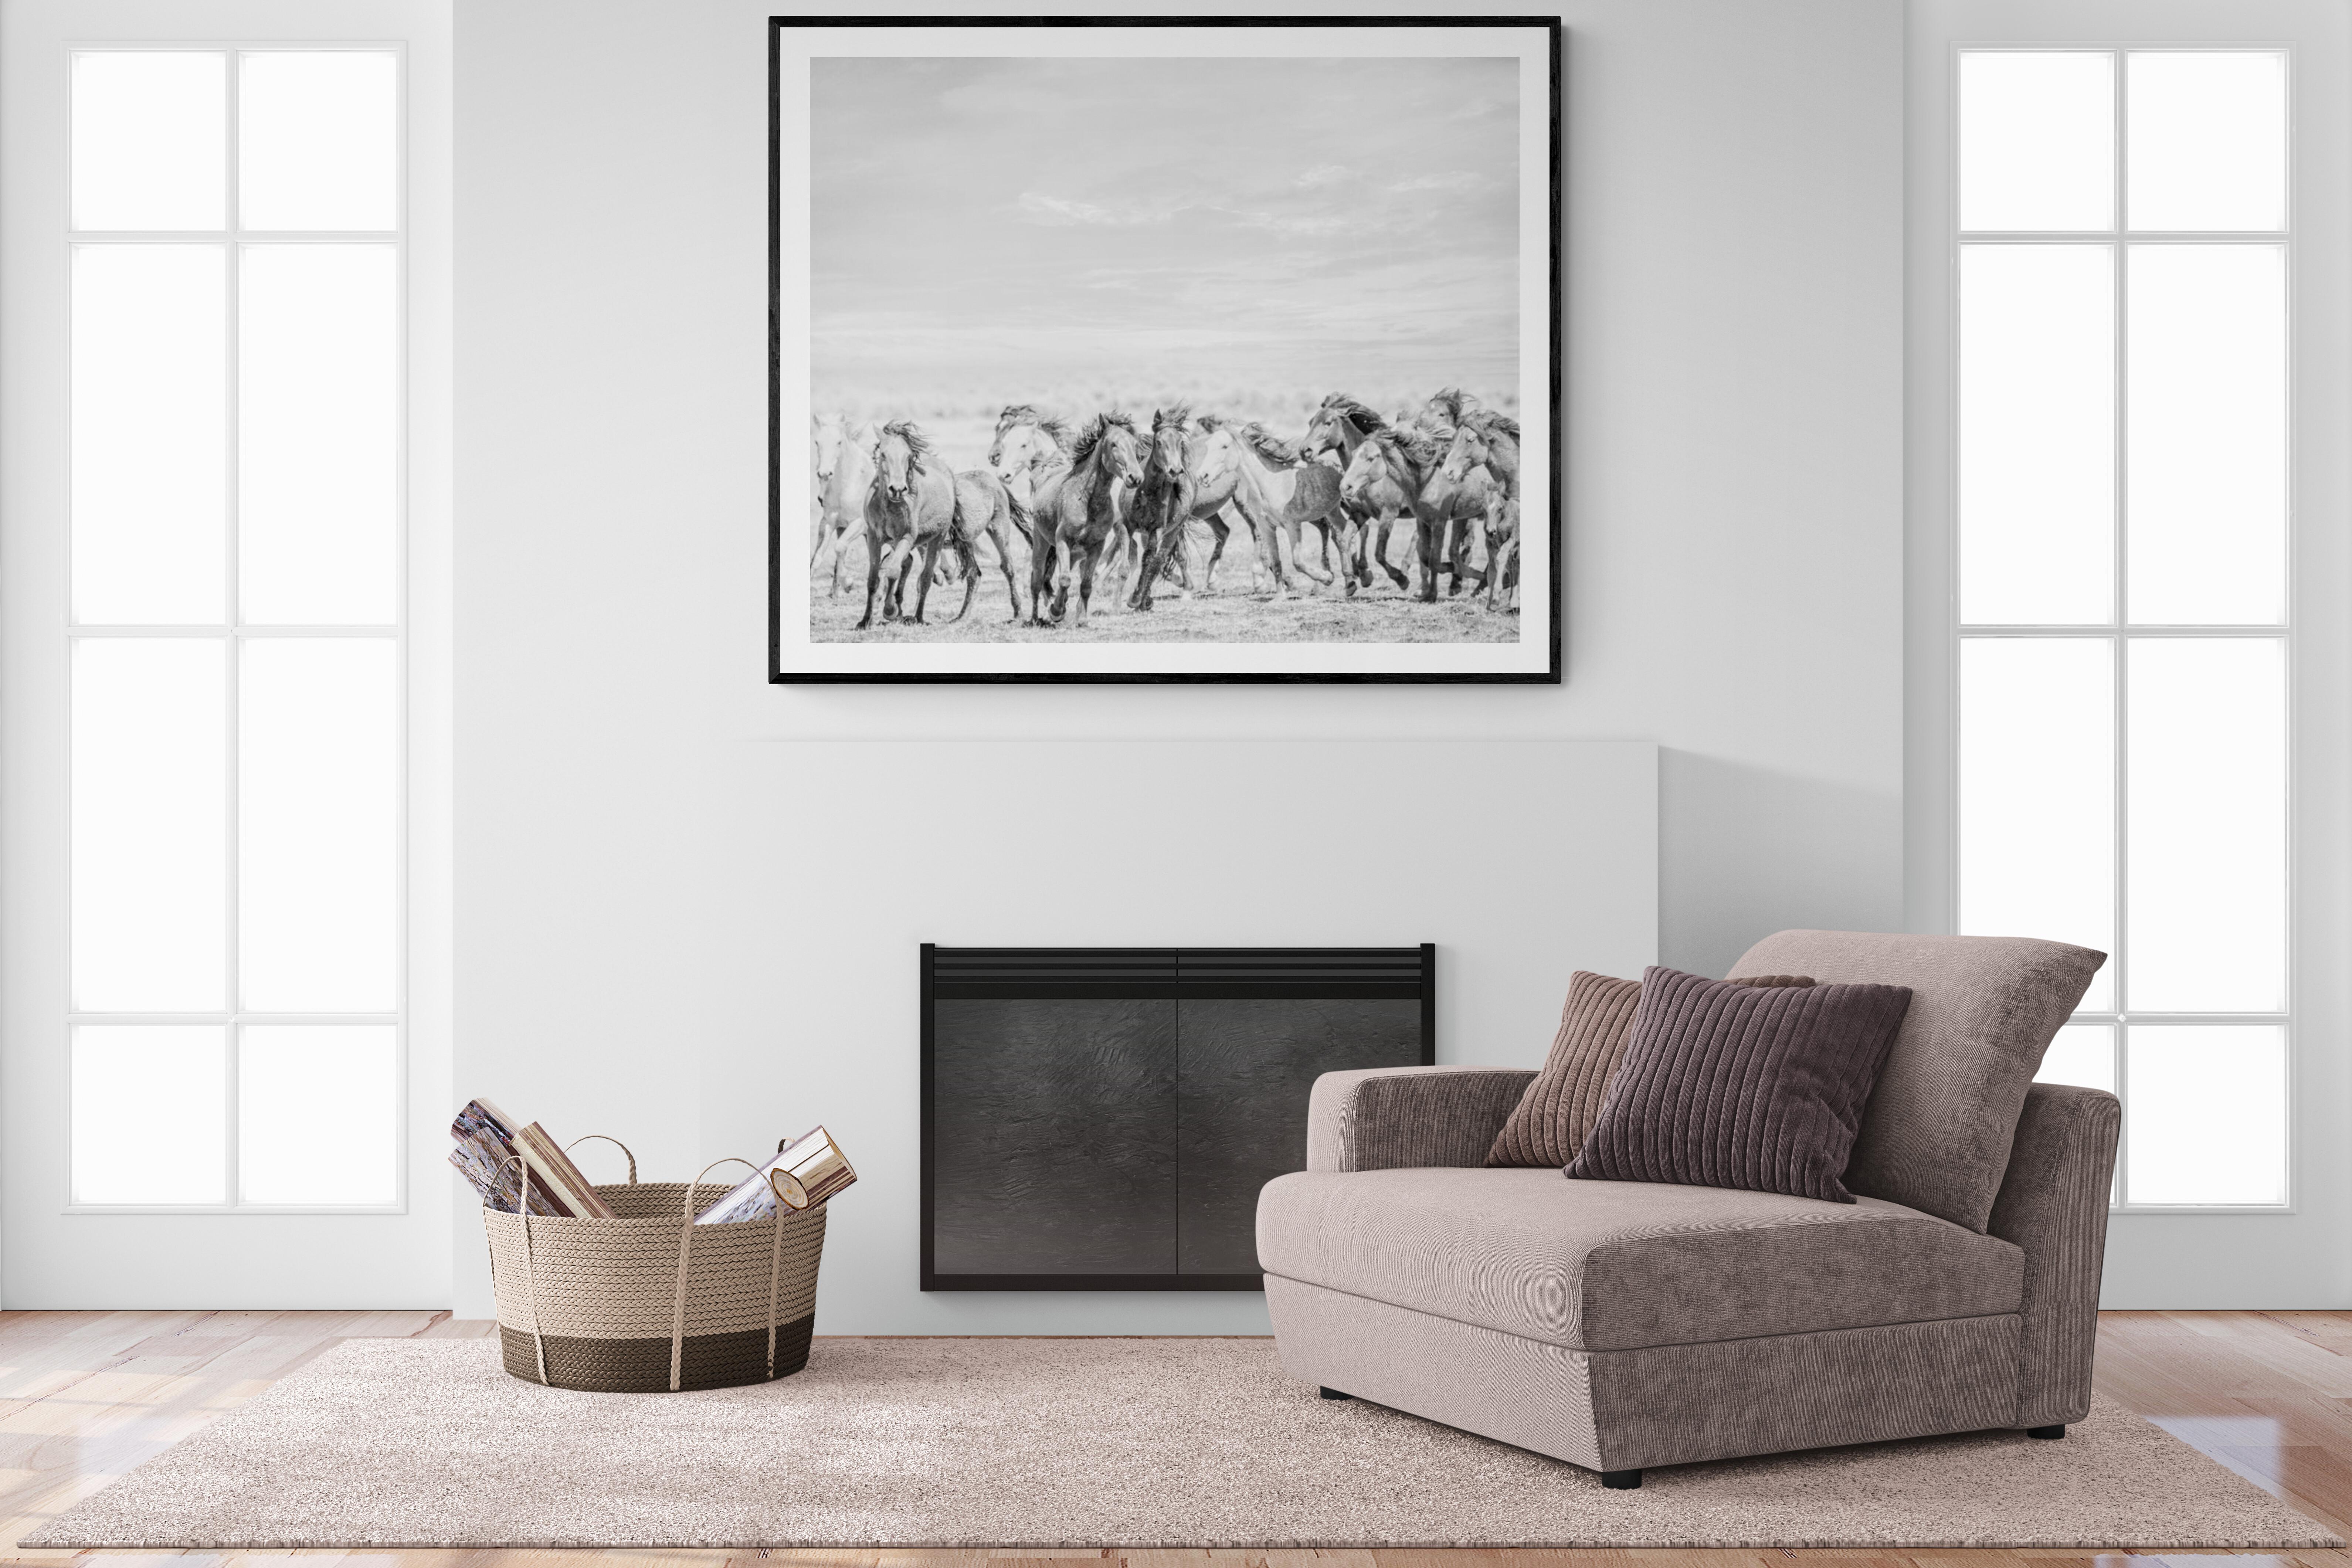 Go West 45x60 Black & White Photography Wild Horses Photograph Mustangs Unsigned 2